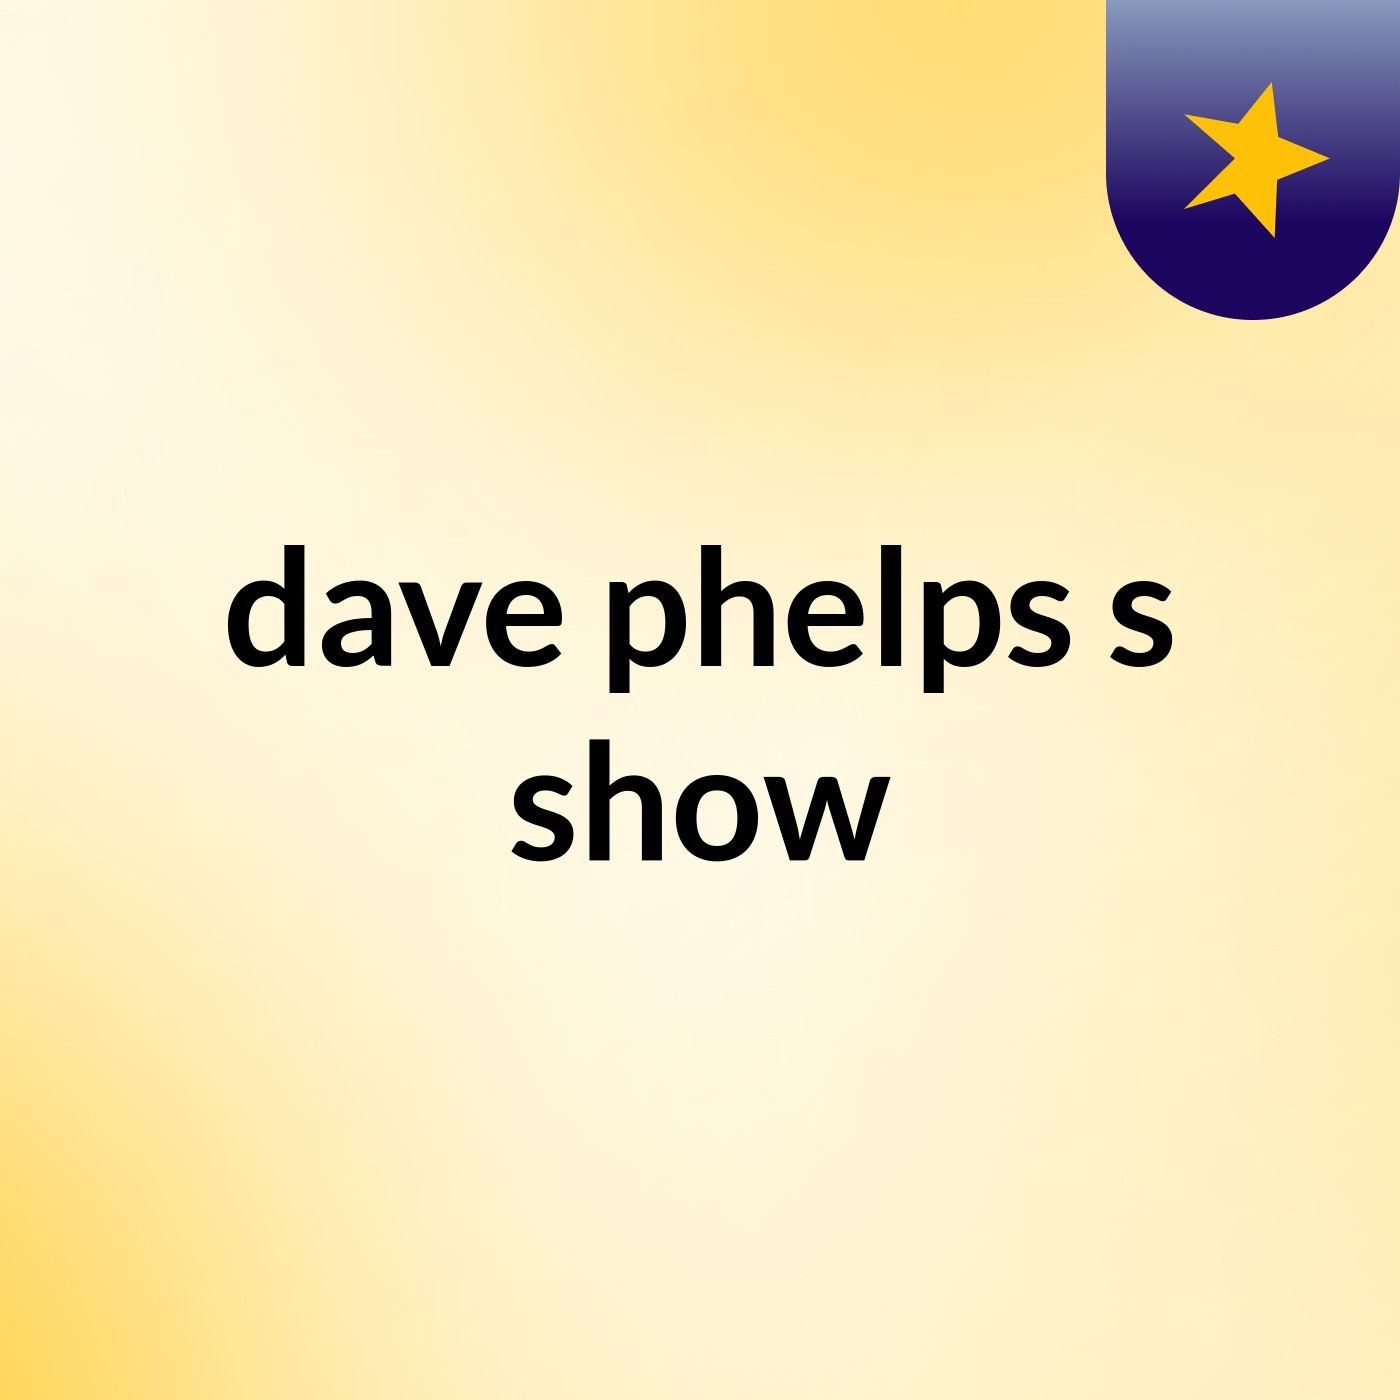 dave phelps's show